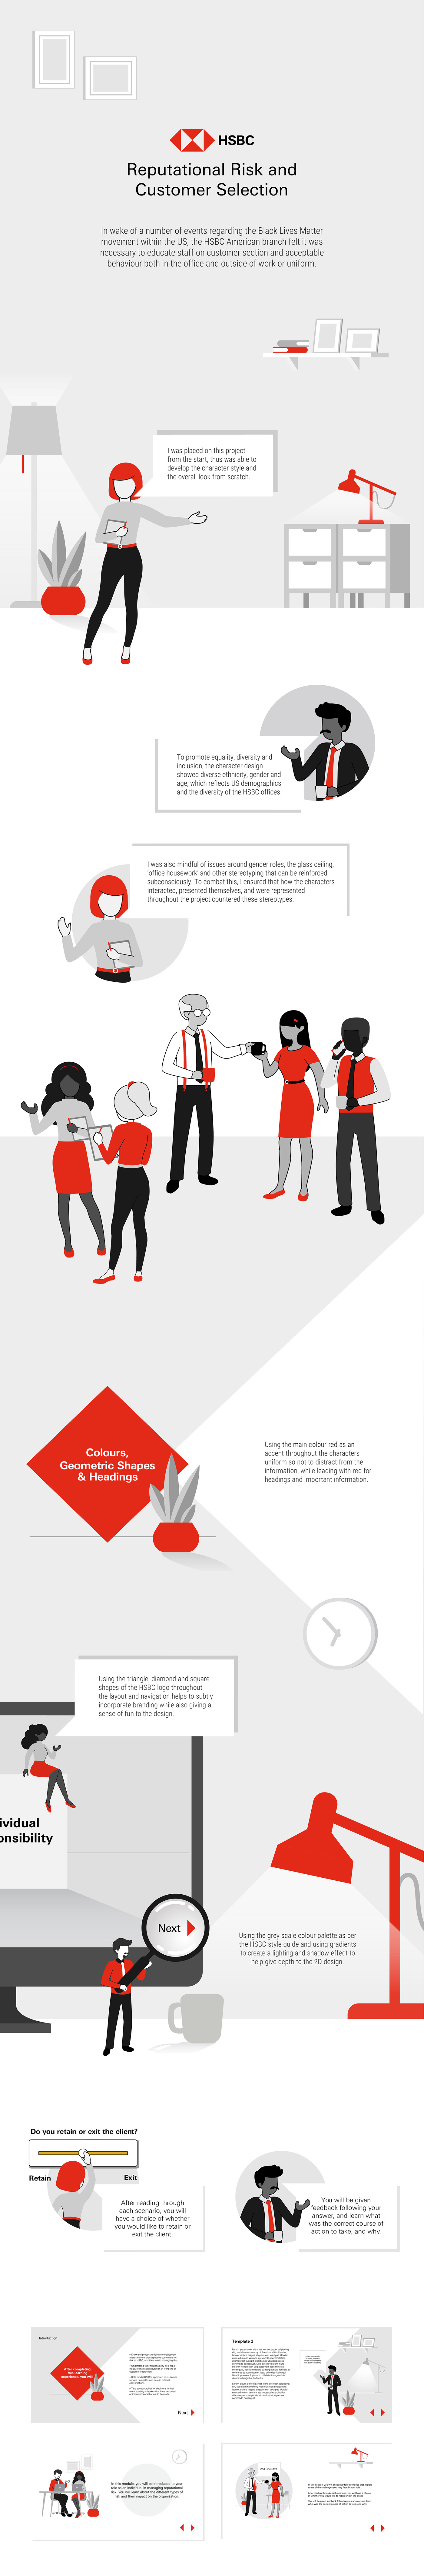 character diversity characters gradient lighting HSBC ILLUSTRATION  Layout red and grey